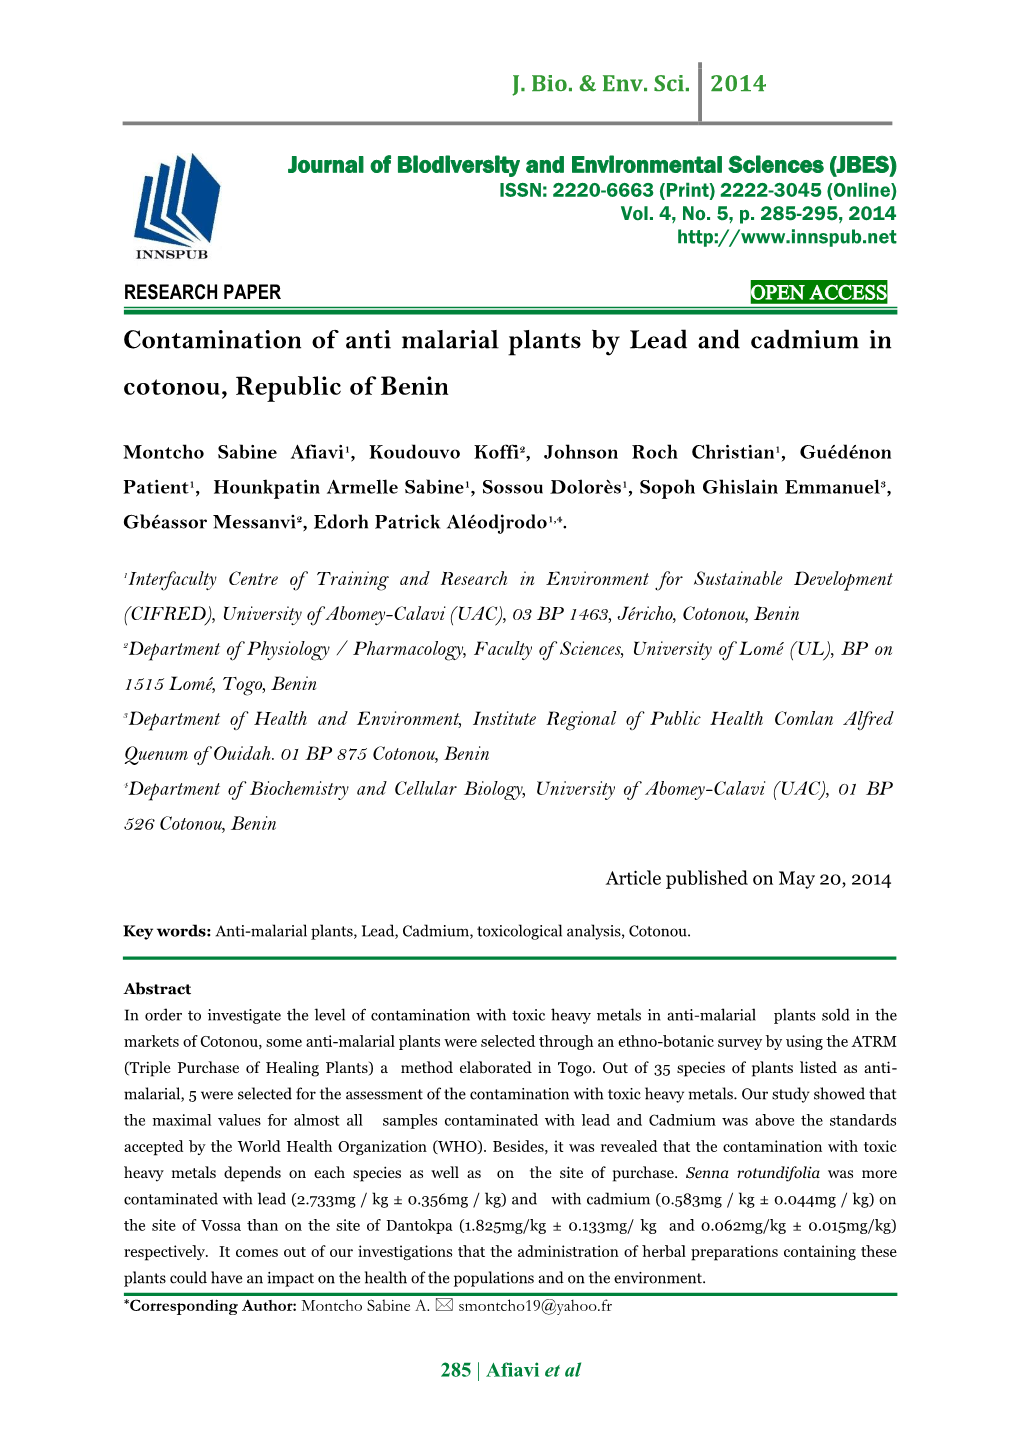 Contamination of Anti Malarial Plants by Lead and Cadmium in Cotonou, Republic of Benin